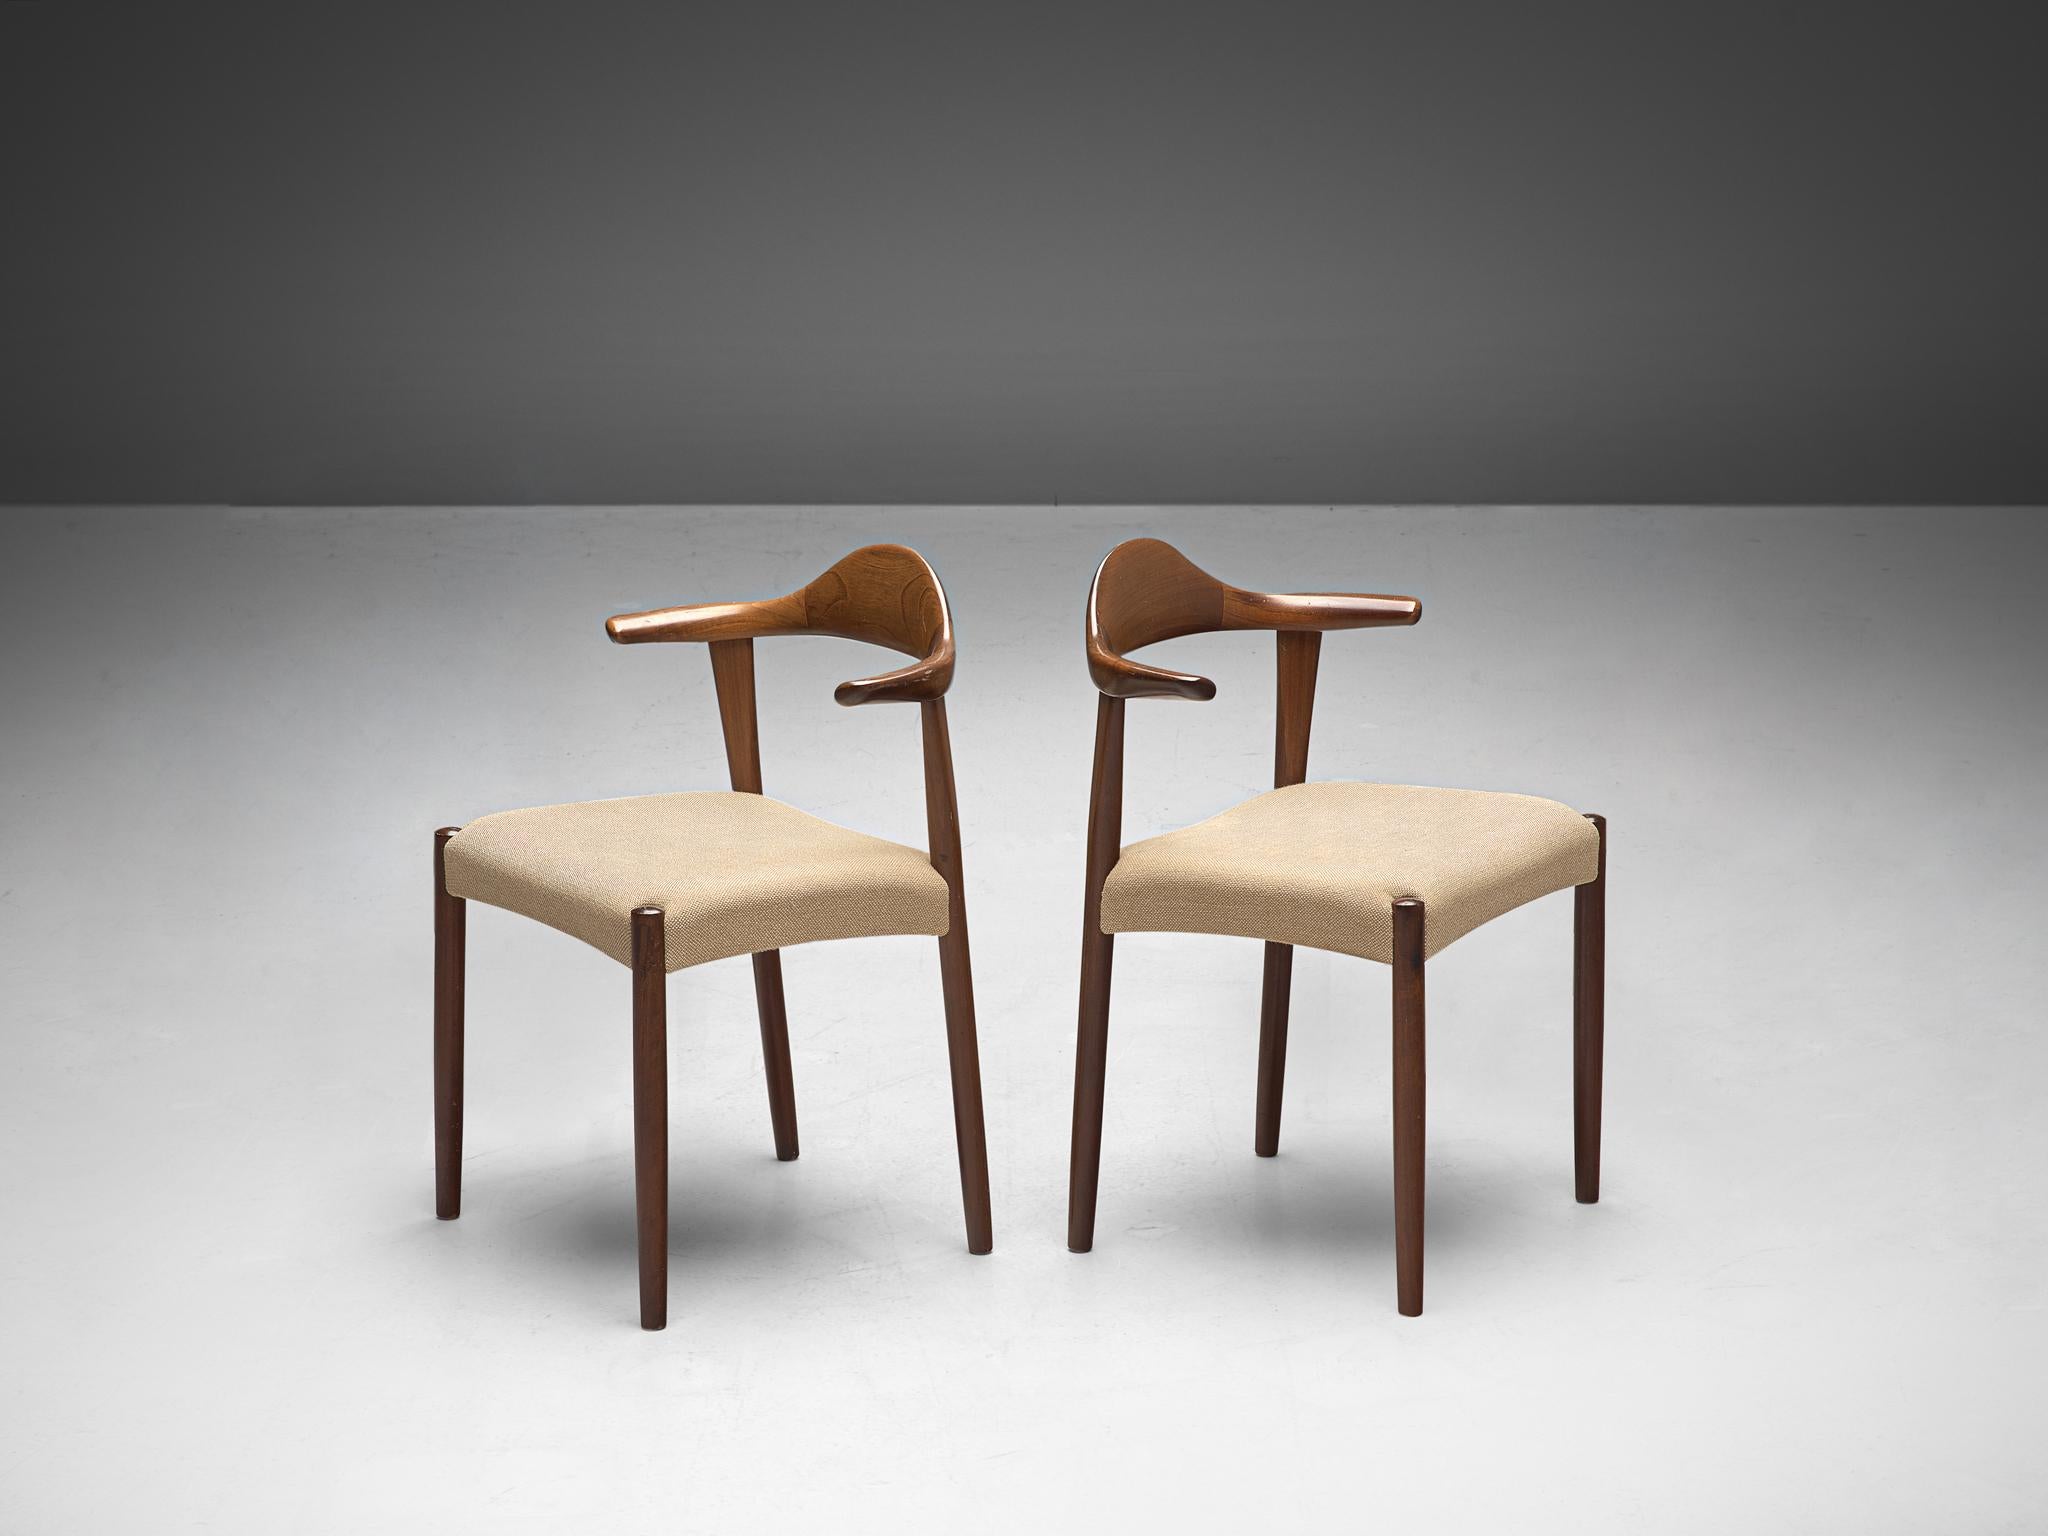 Harry Østergaard for Randers Møbelfabrik, pair of 'Bull Horn' chairs, teak, fabric 1950s.

This dining chair of Danish origin owes its name to the armrests that are based on the shape of a bull horn. The wooden frame illustrates a dynamic